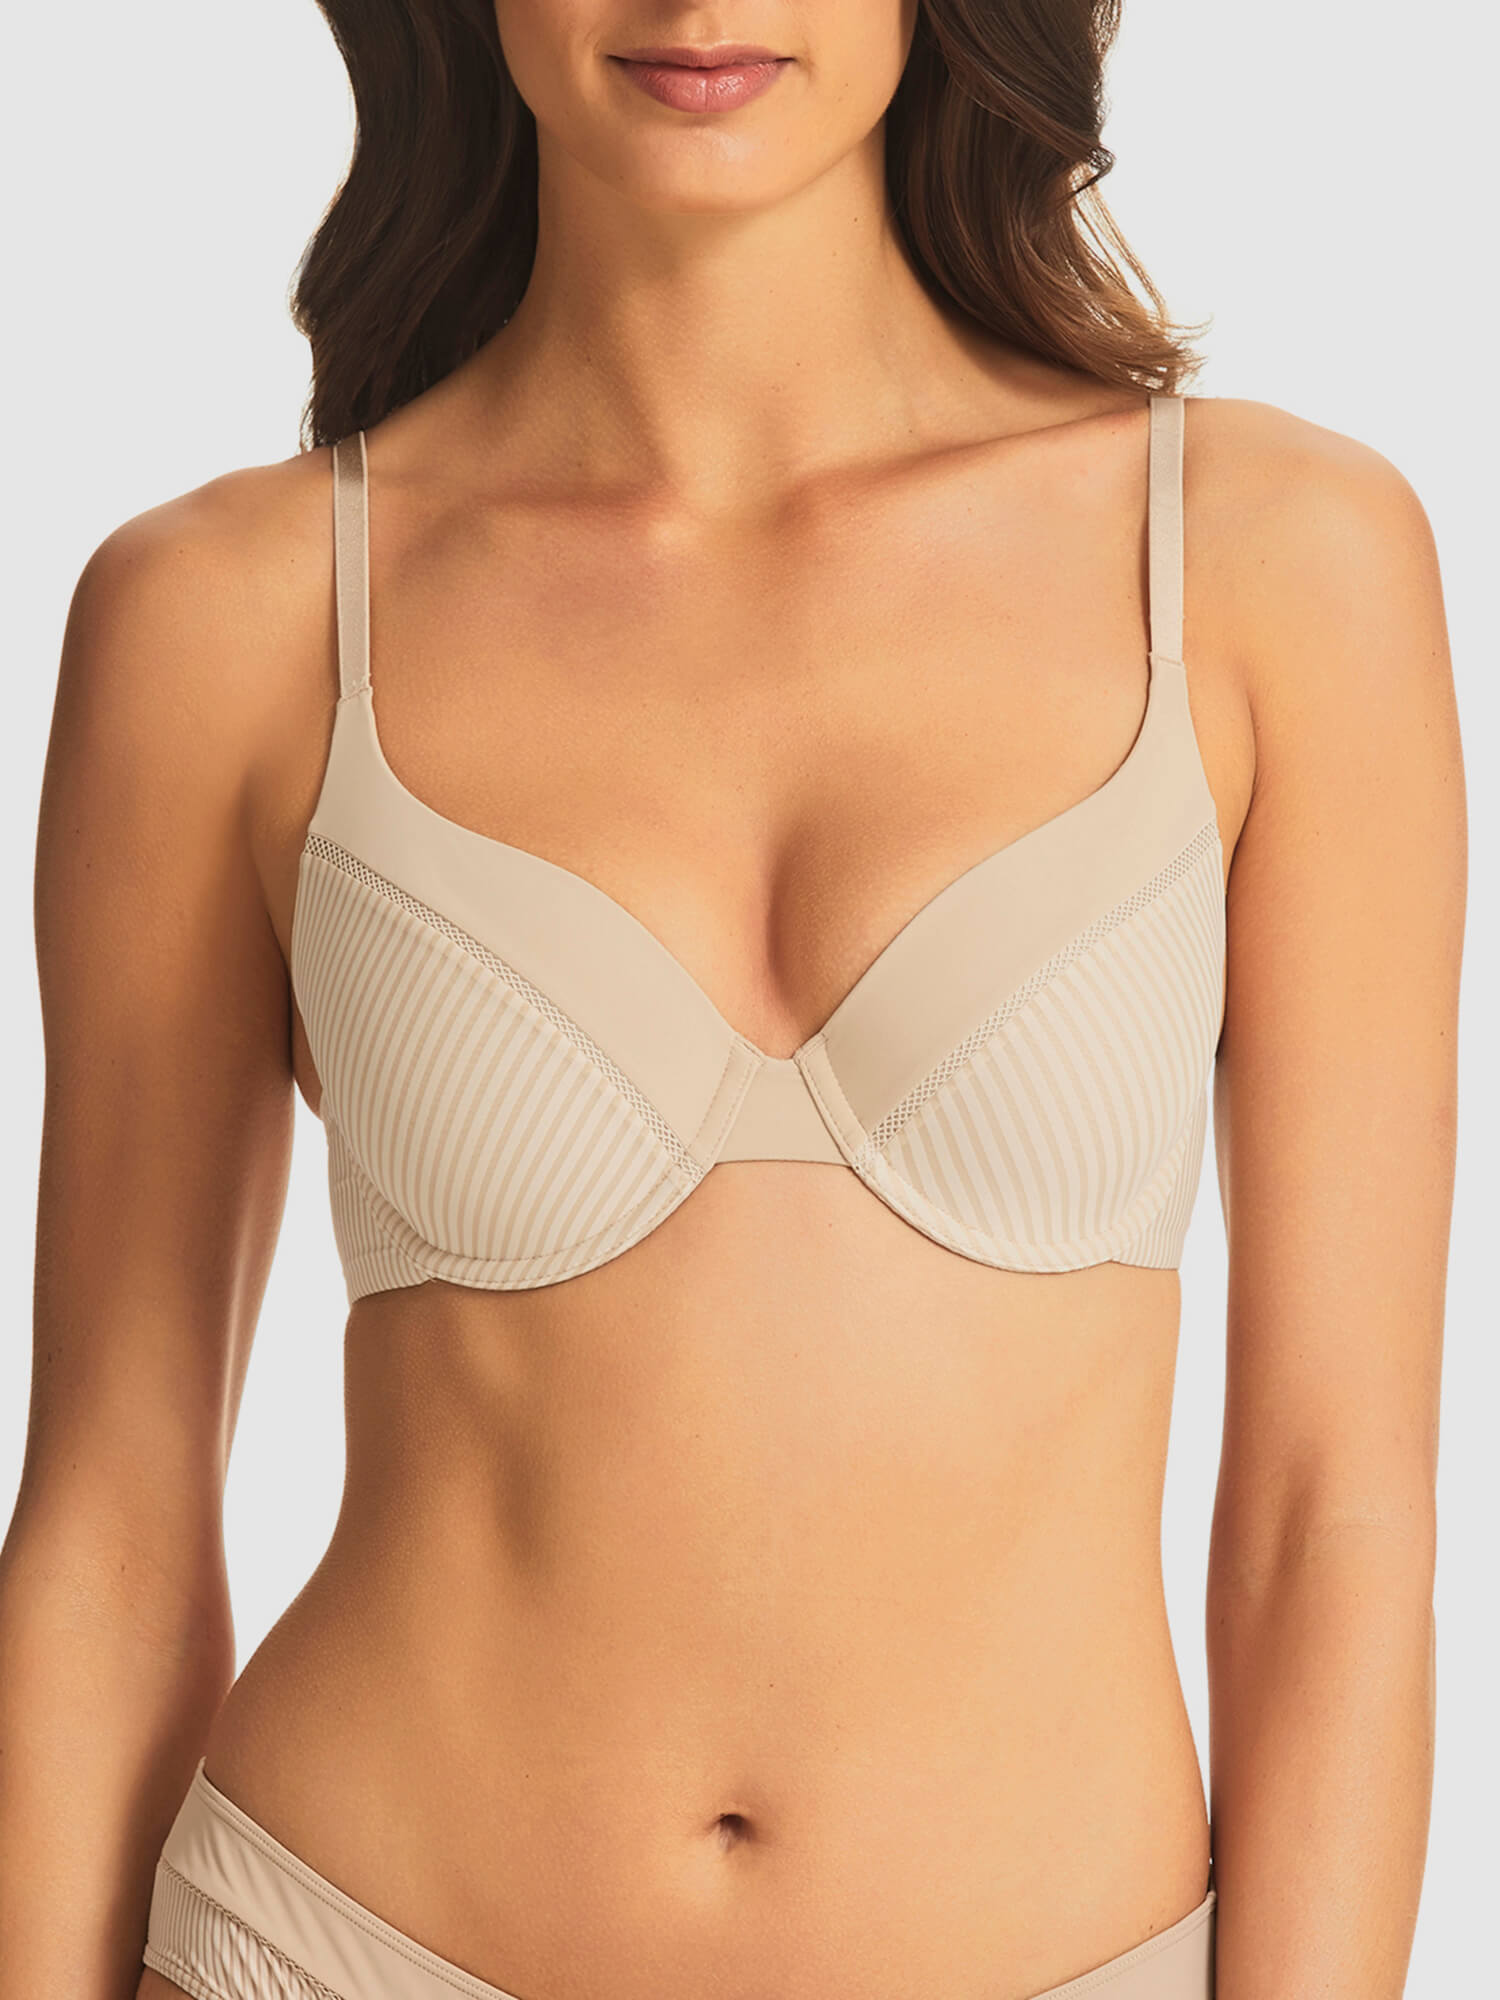 Why Bra Cups Gap (and How To Avoid It) - ParfaitLingerie.com - Blog